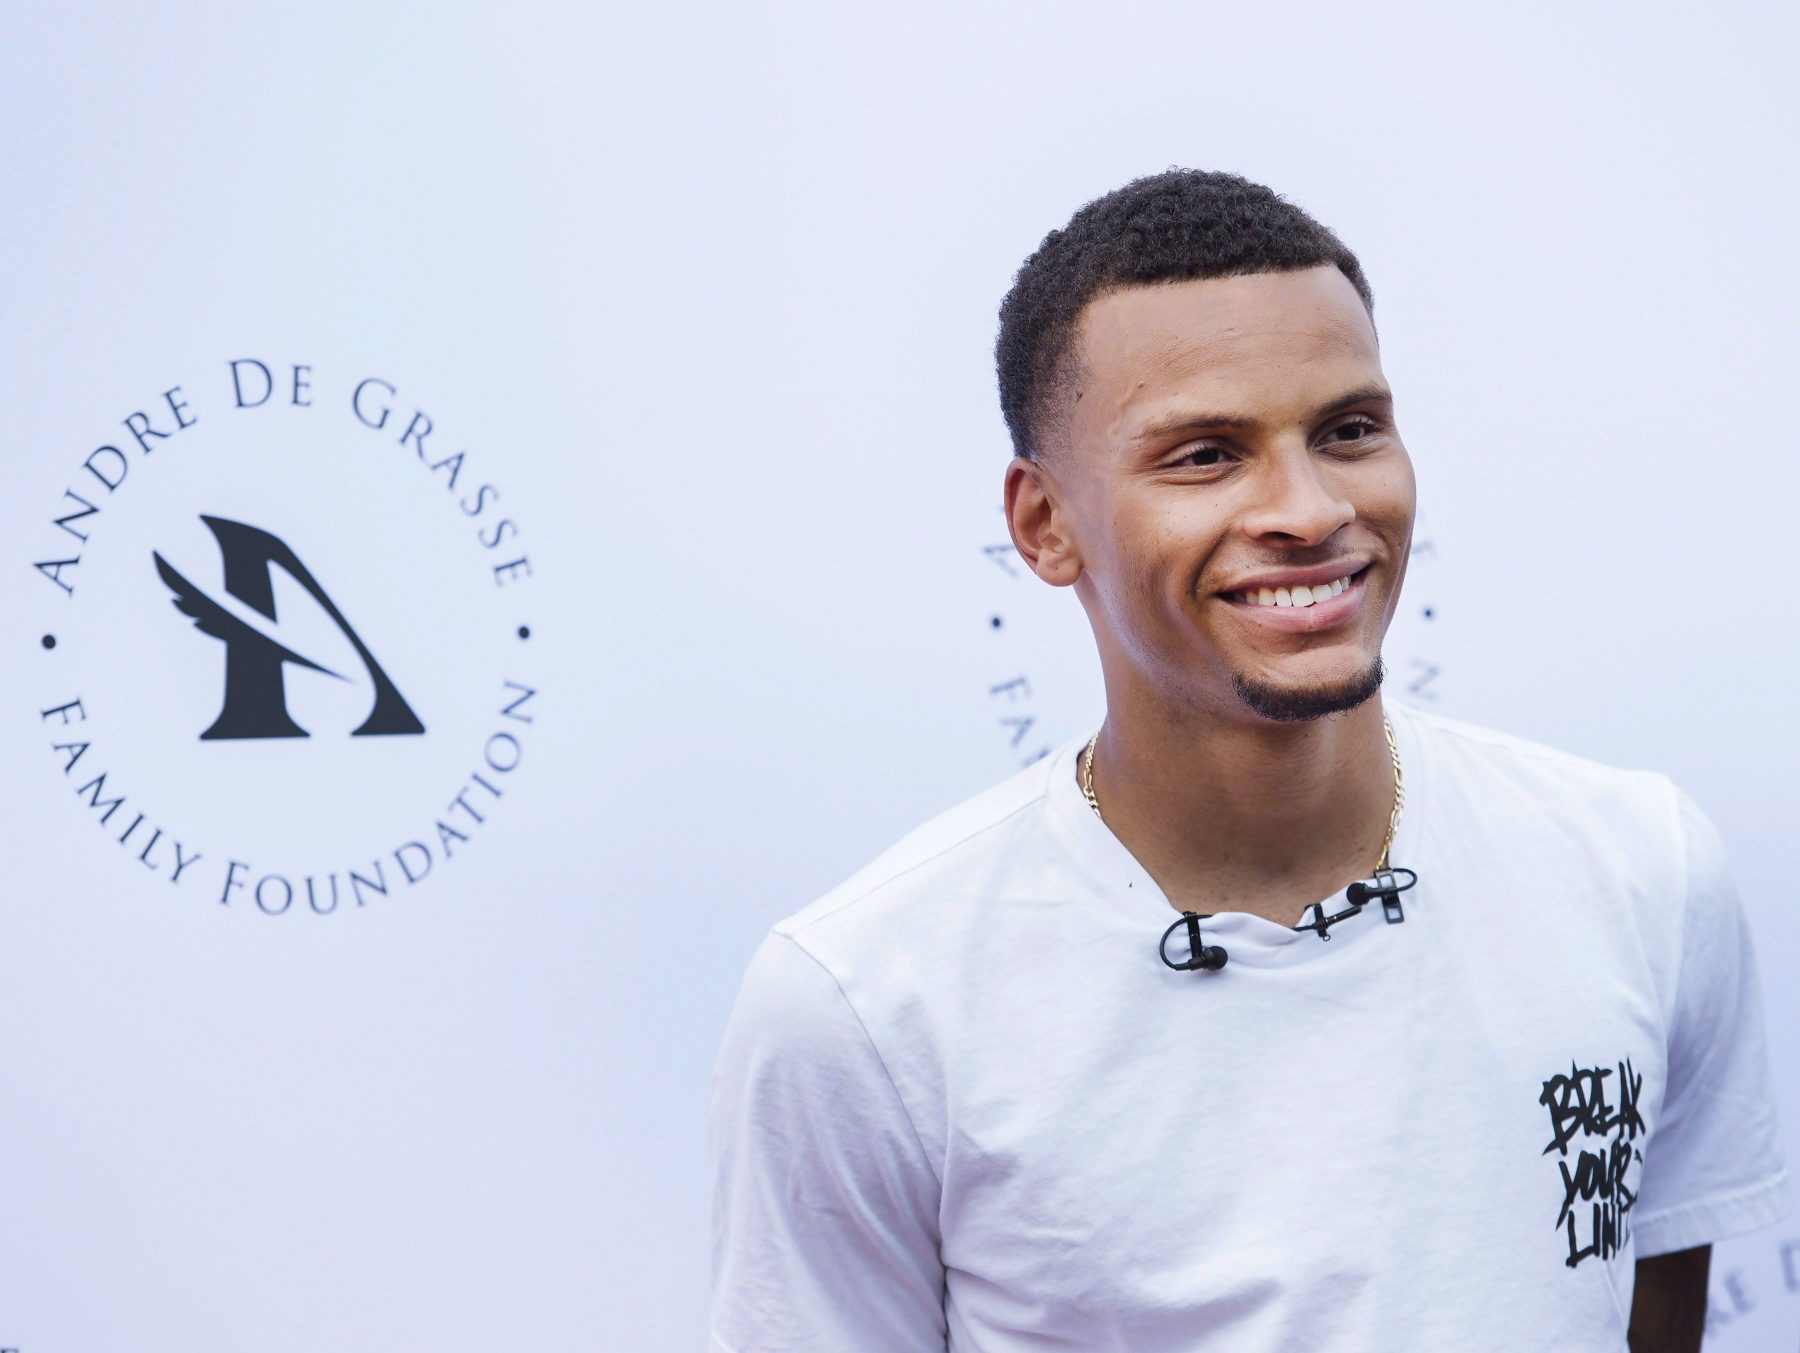 Andre De Grasse at the launch of his foundation